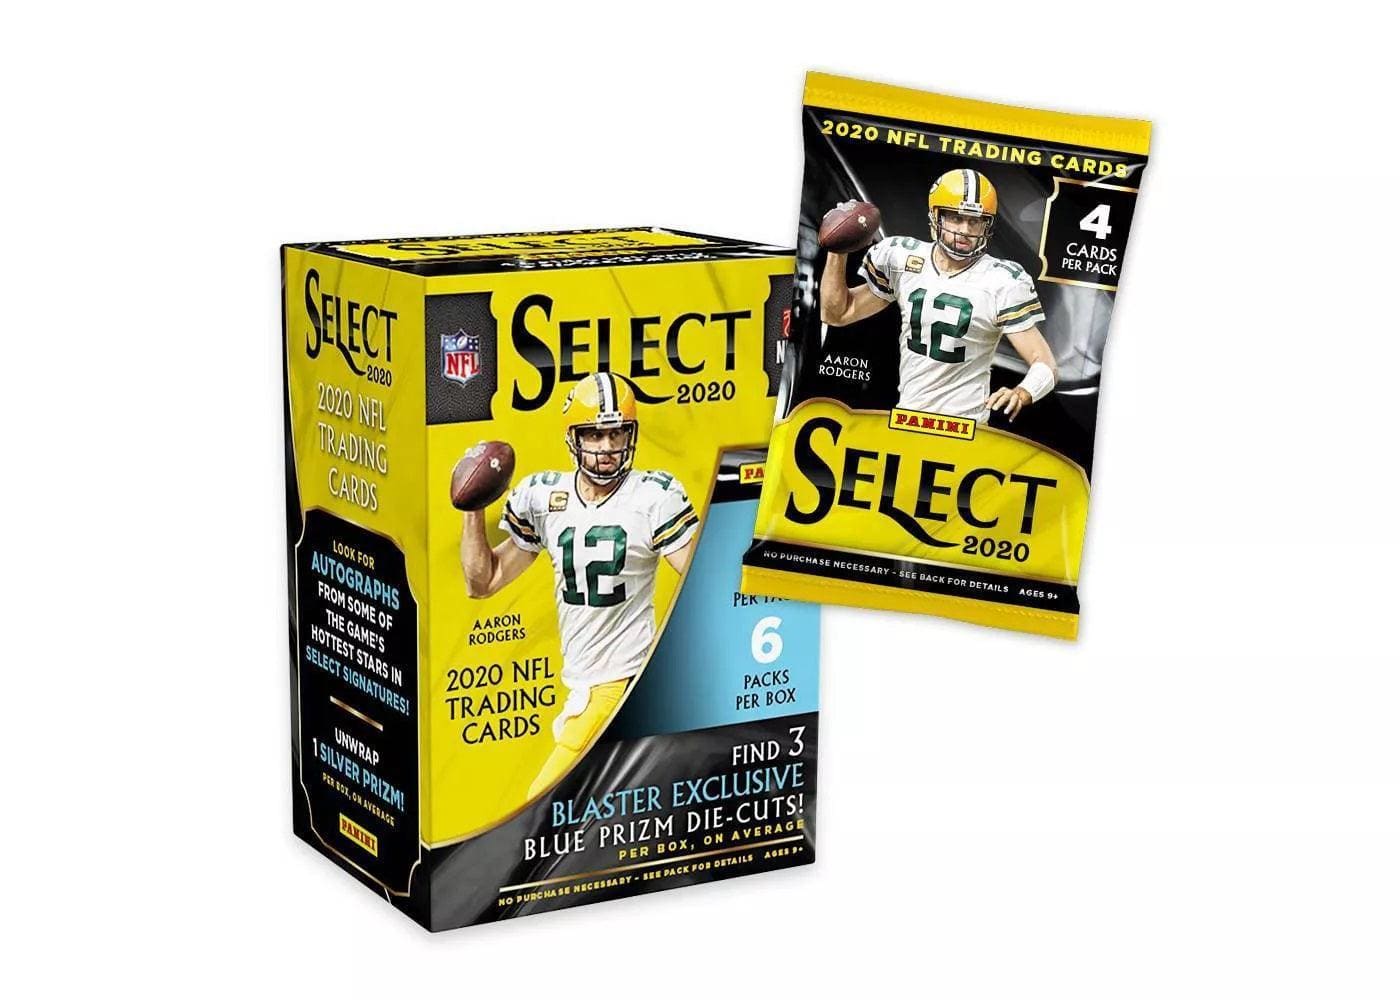 2020 NFL Panini Select Football Trading Card Blaster Box - Image 02 - Only at BallersClubKickz.com - Panini presents the 2020 NFL Select full box! Each box contains 6 foil packs, and each pack contains 4 NFL trading cards. Be on the lookout for the 3 blaster-exclusive Blue Prizm die cuts per box, on average.